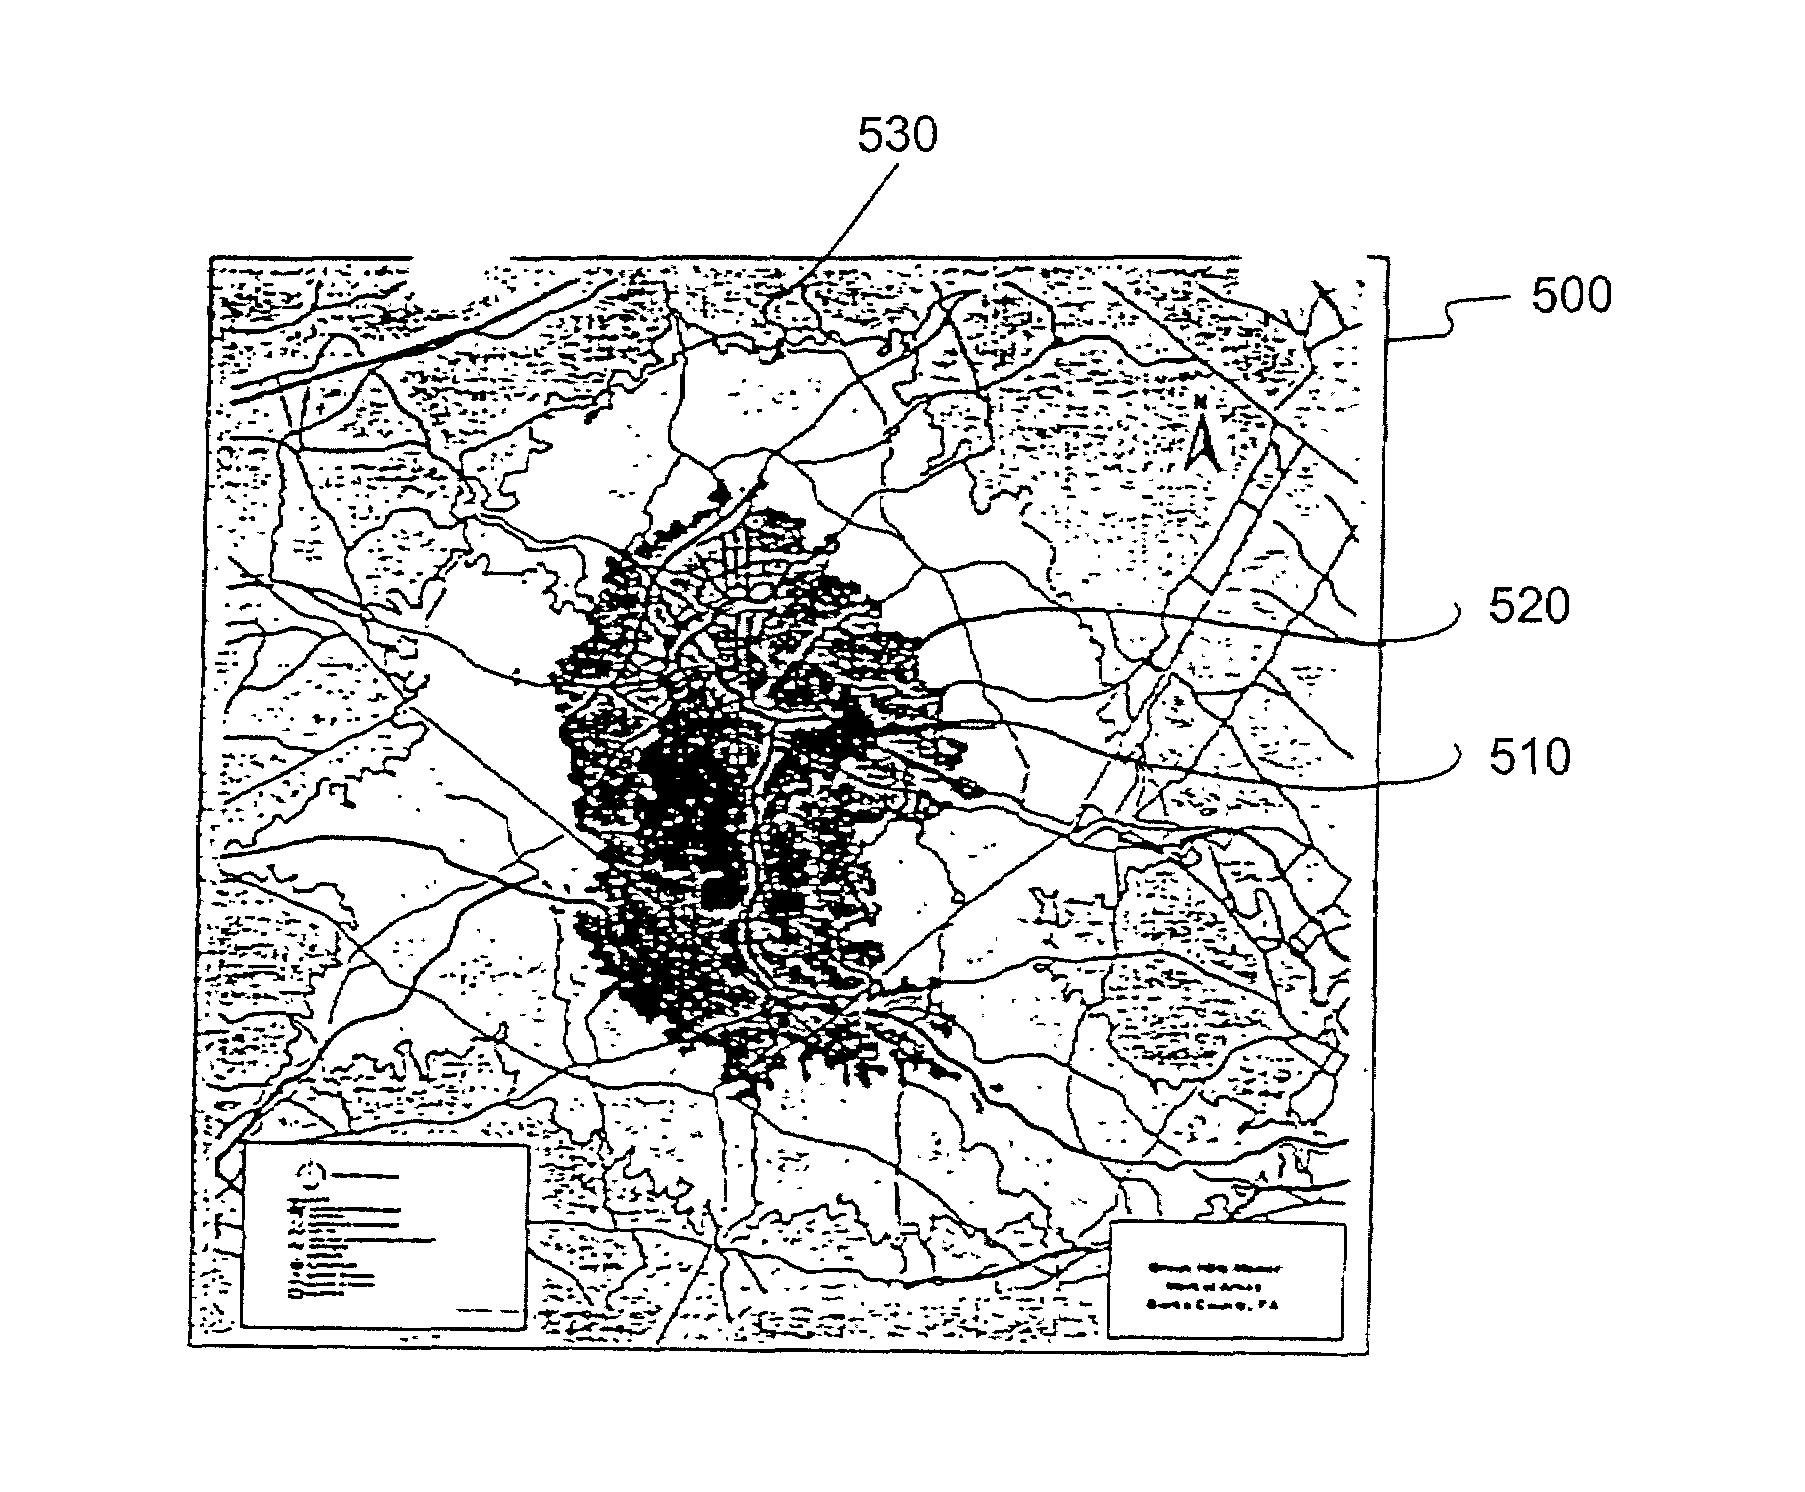 Method for analyzing net demand for a market area utilizing weighted bands